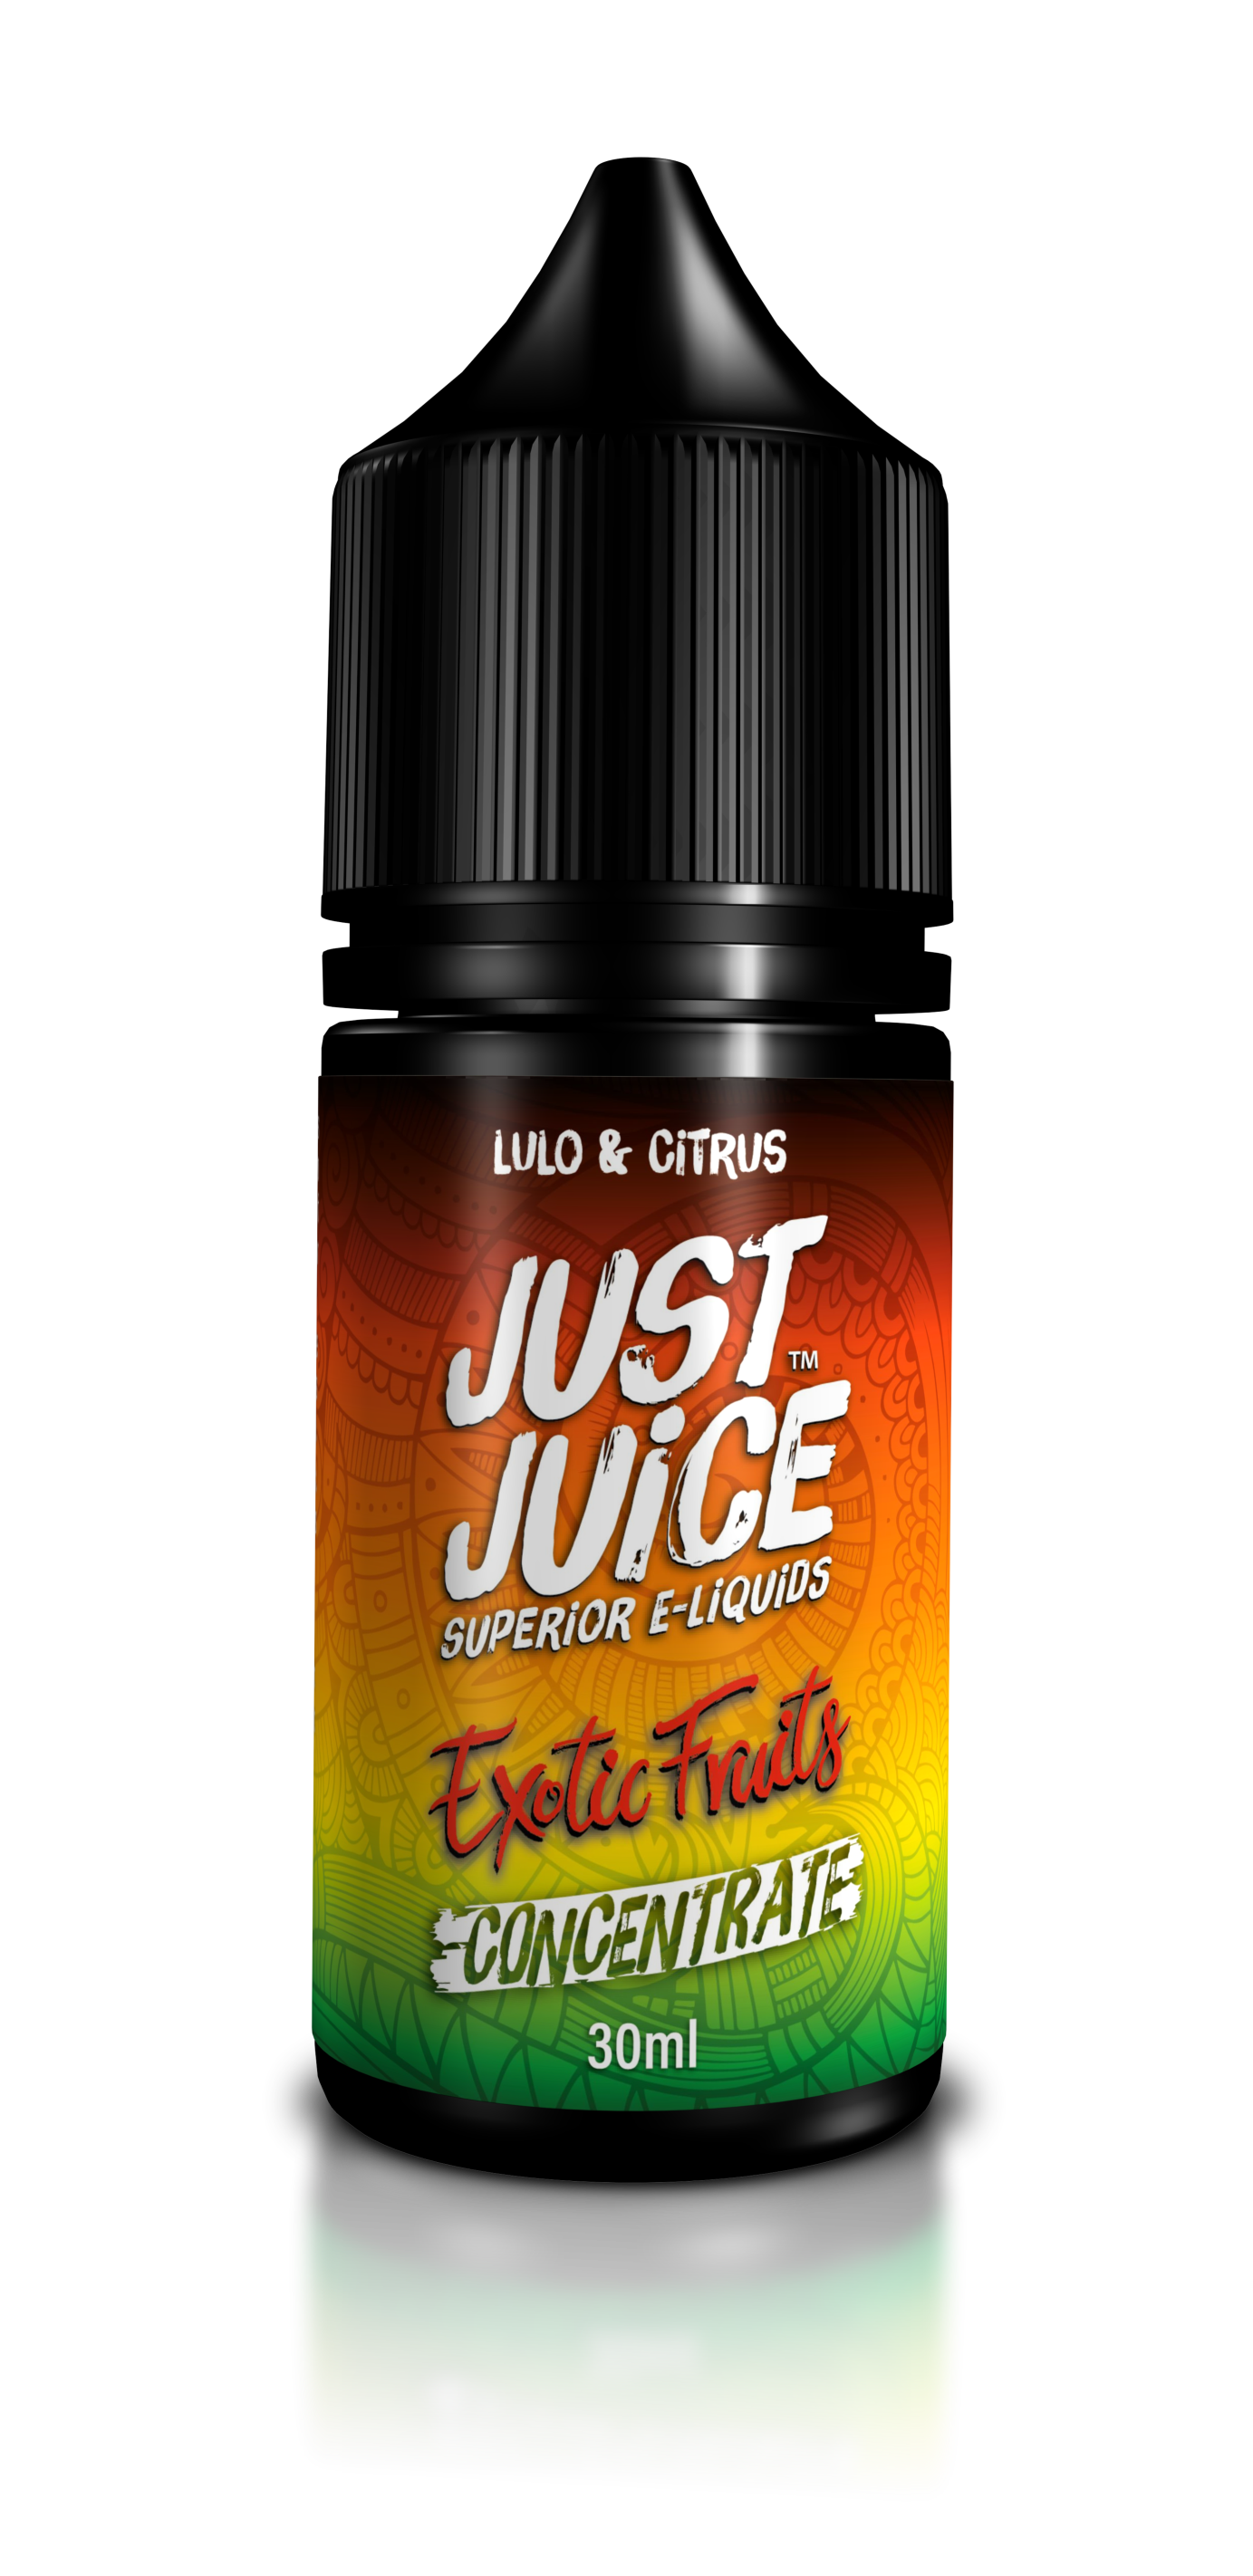 Lulo & Citrus Flavour Concentrate by Just Juice